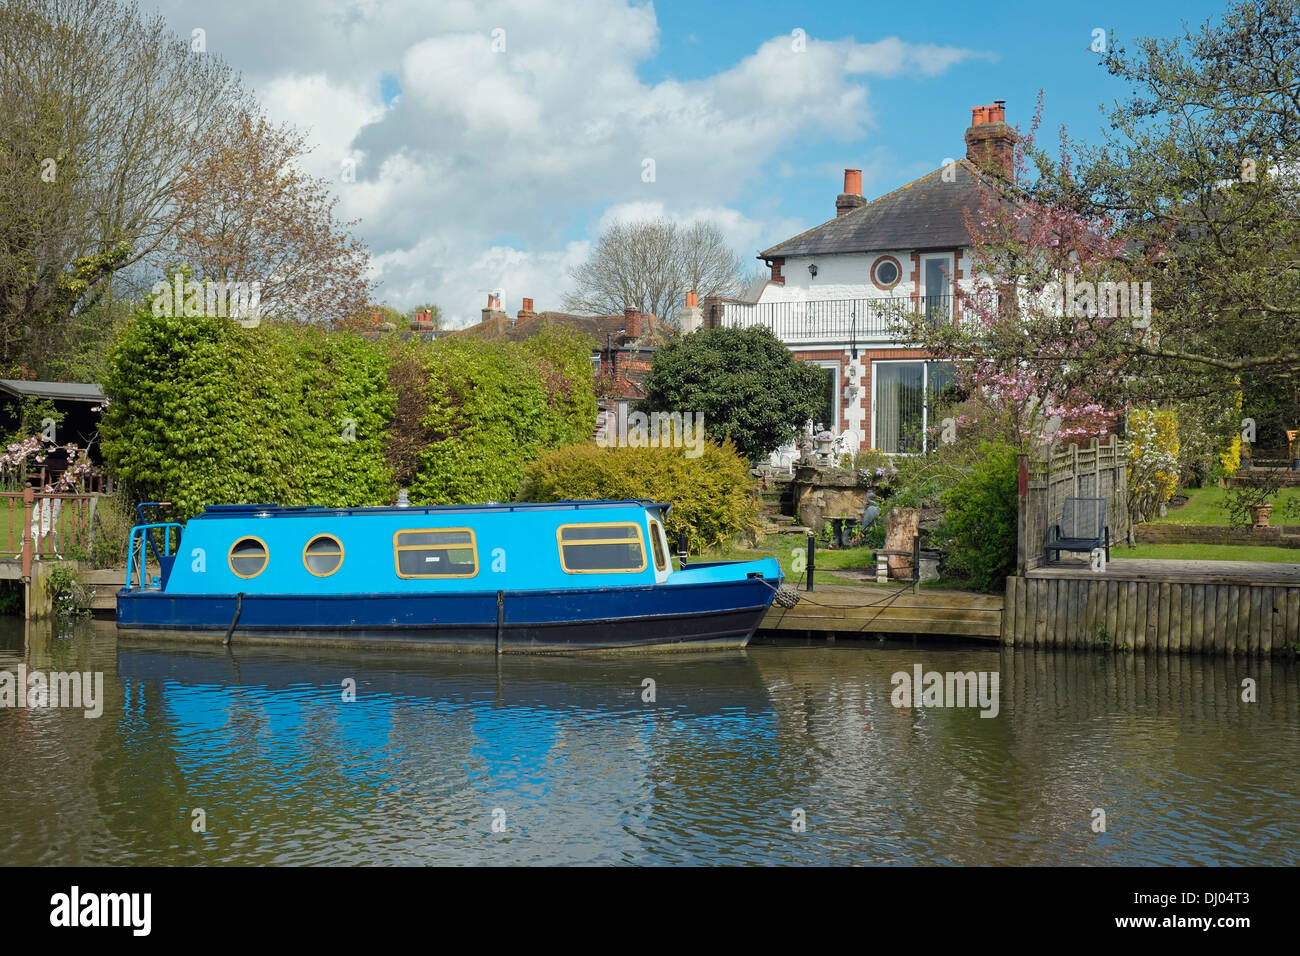 A house with moored narrow boat on the River Wey Navigation, between Guildford and Godalming, Surrey, England. Stock Photo